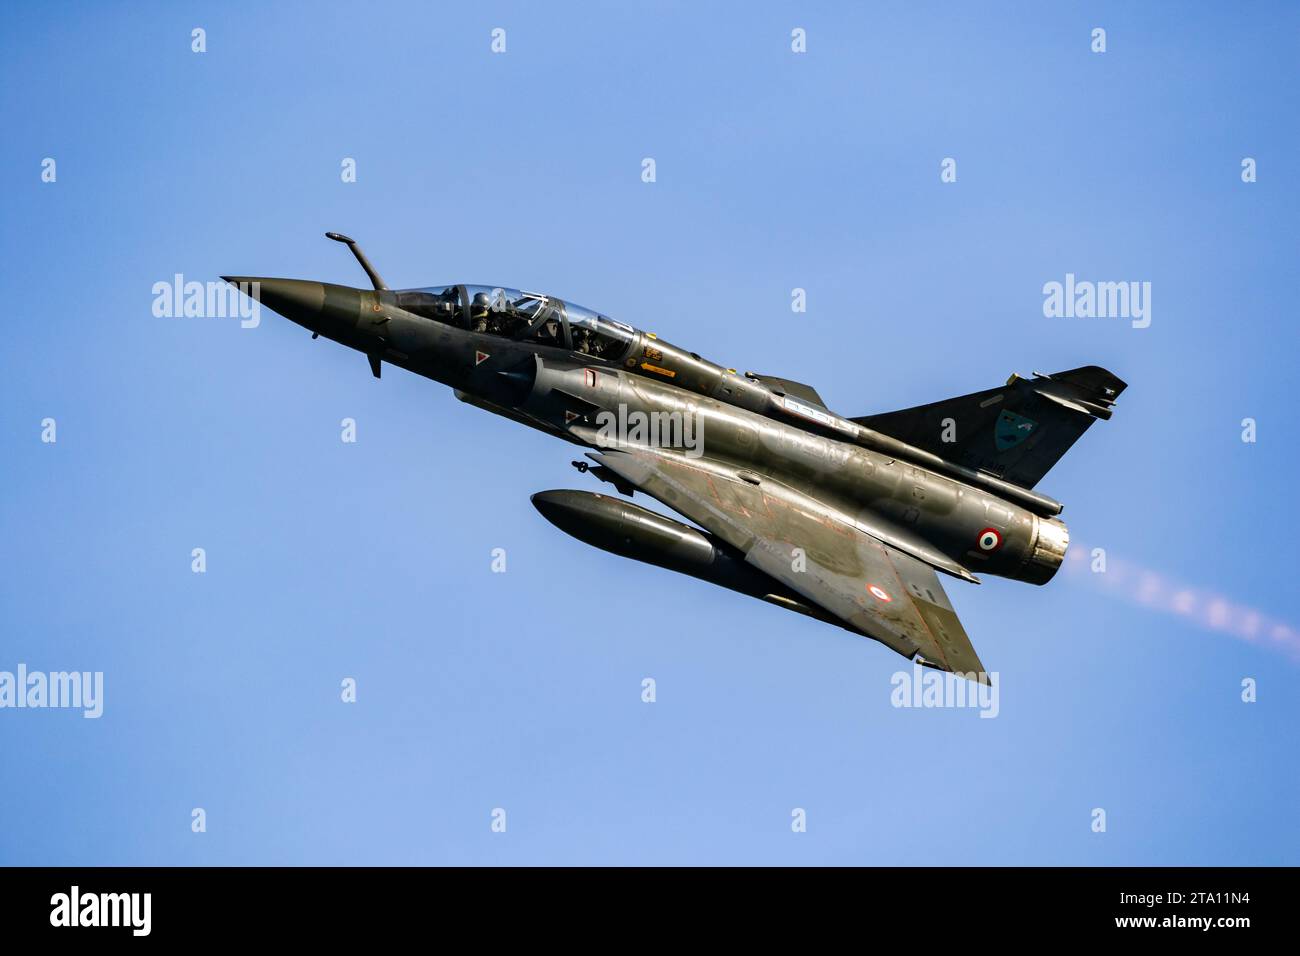 French Air Force Dassault Mirage 2000 fighter jet aircraft in flight over Leeuwarden Air Base. The Netherlands - April 19, 2018 Stock Photo